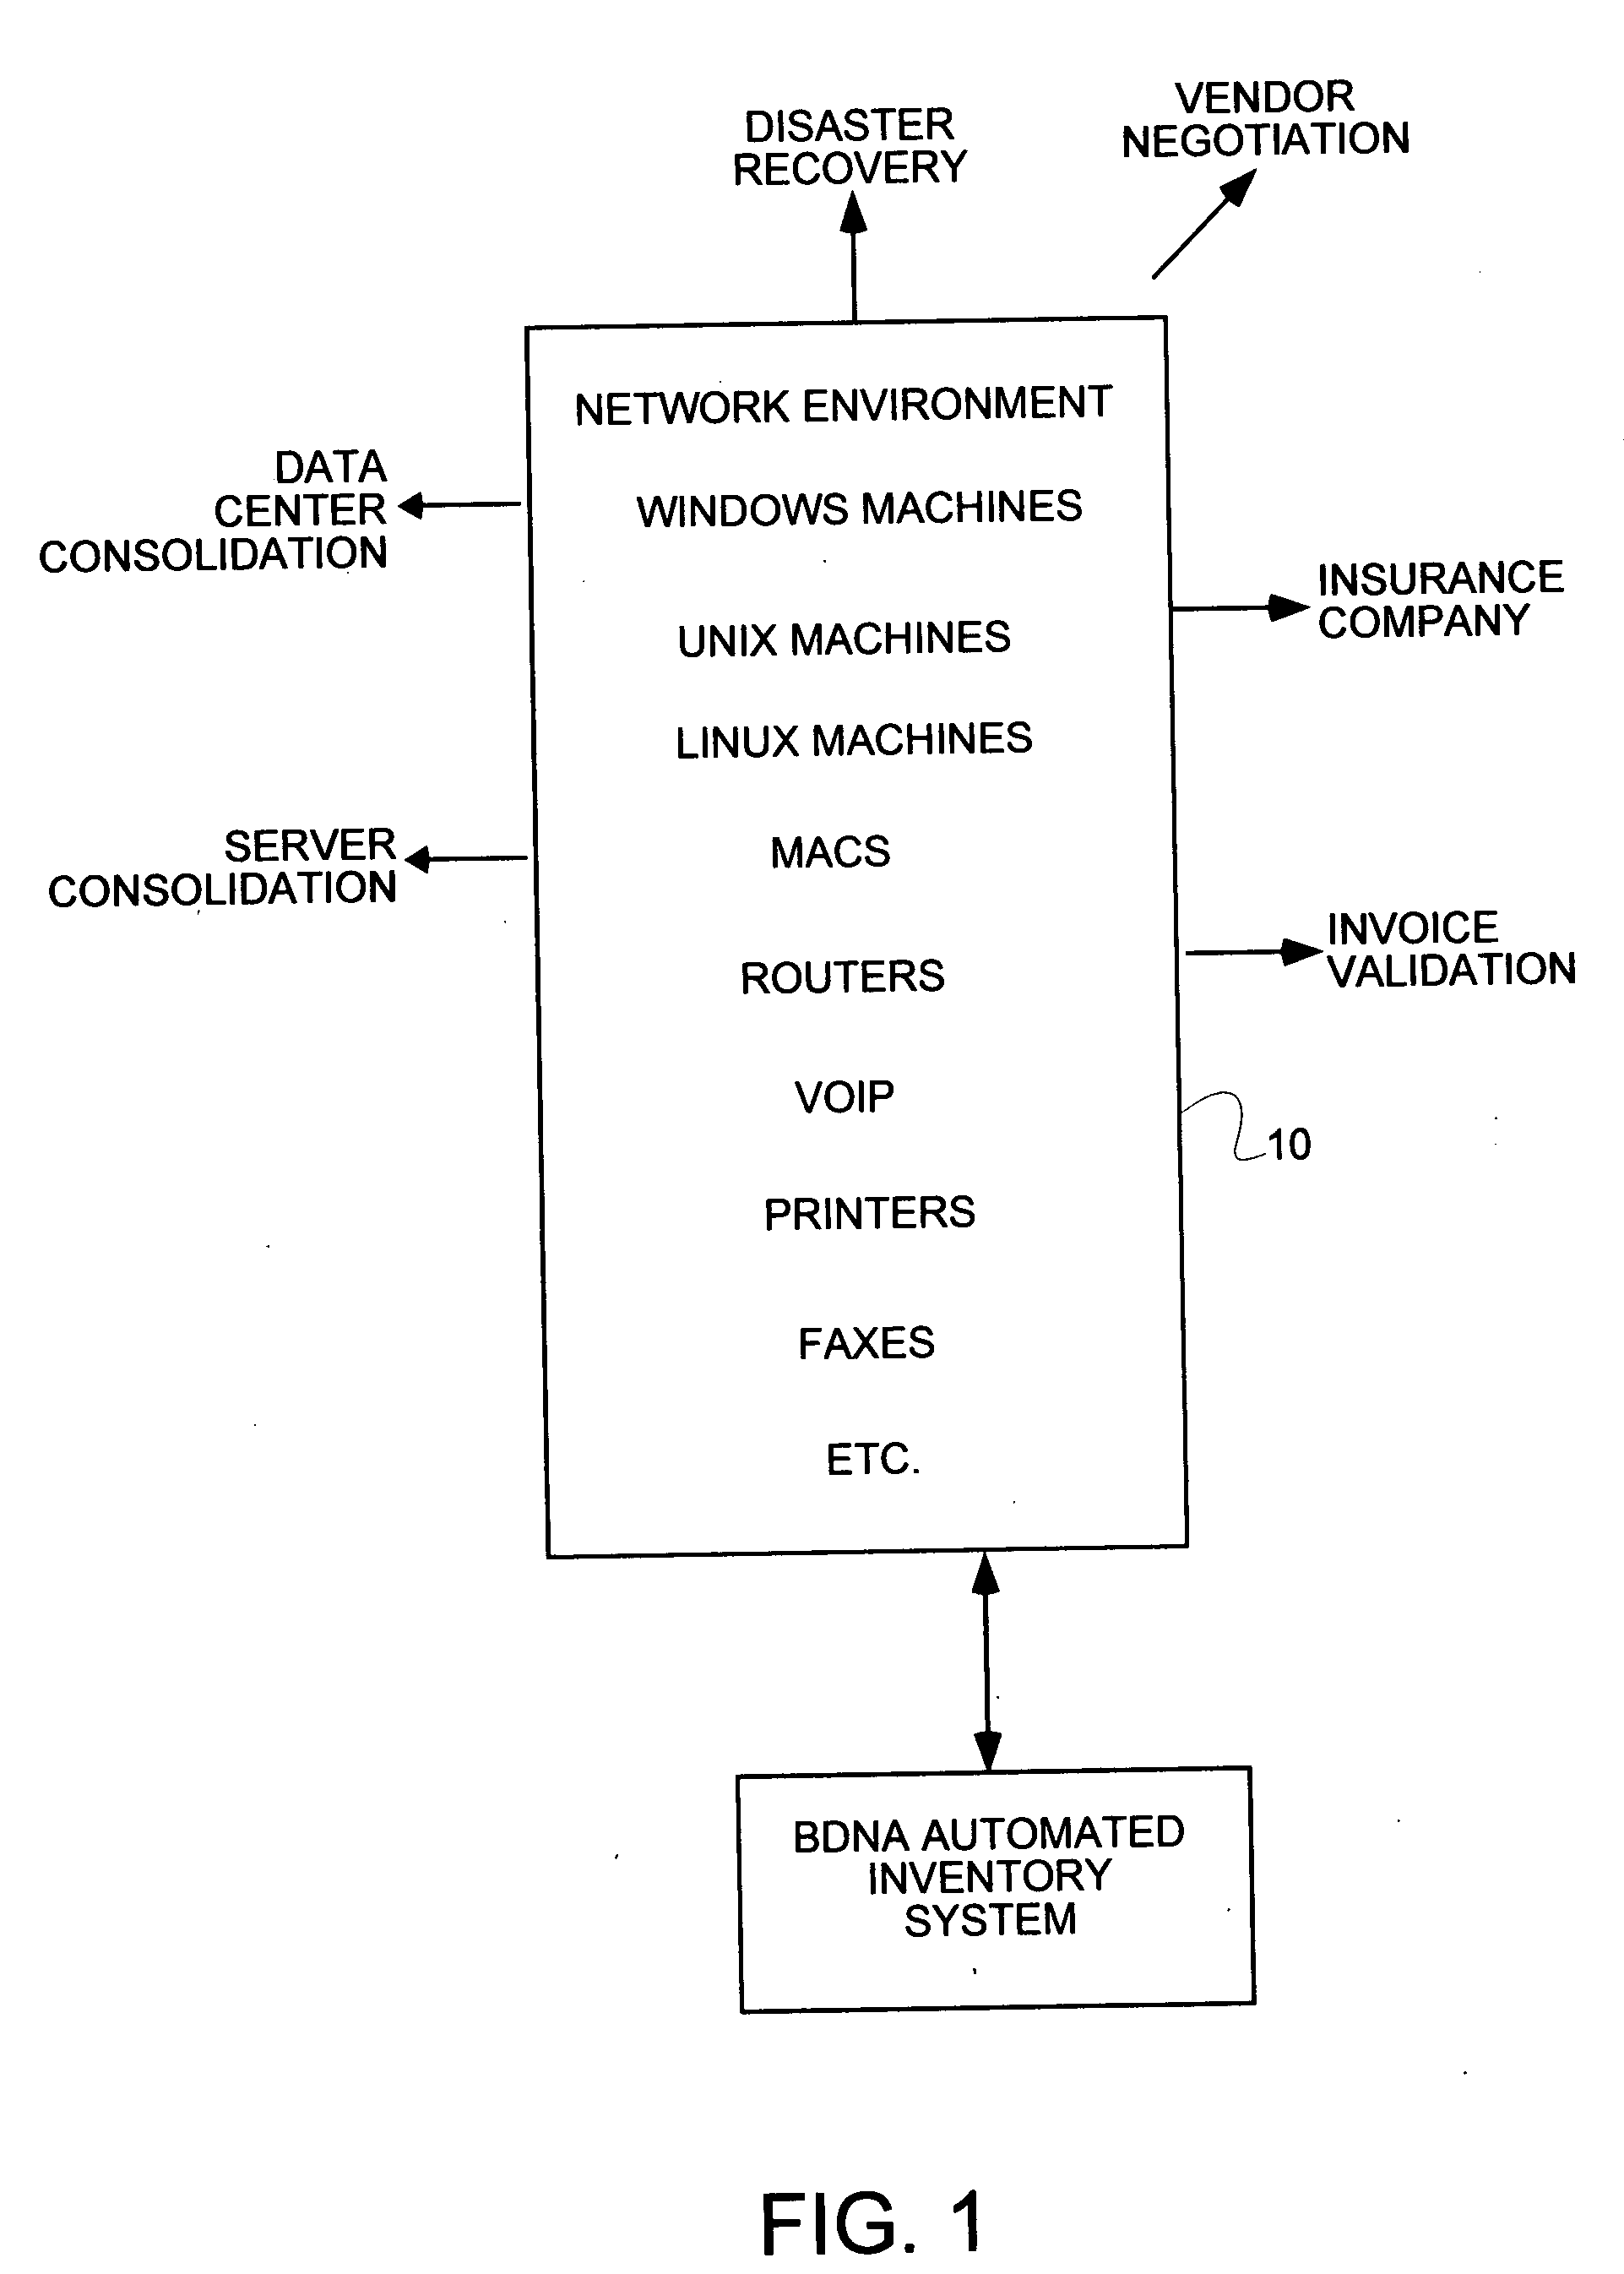 Creation and use of automated, agent-free baseline inventory of assets system